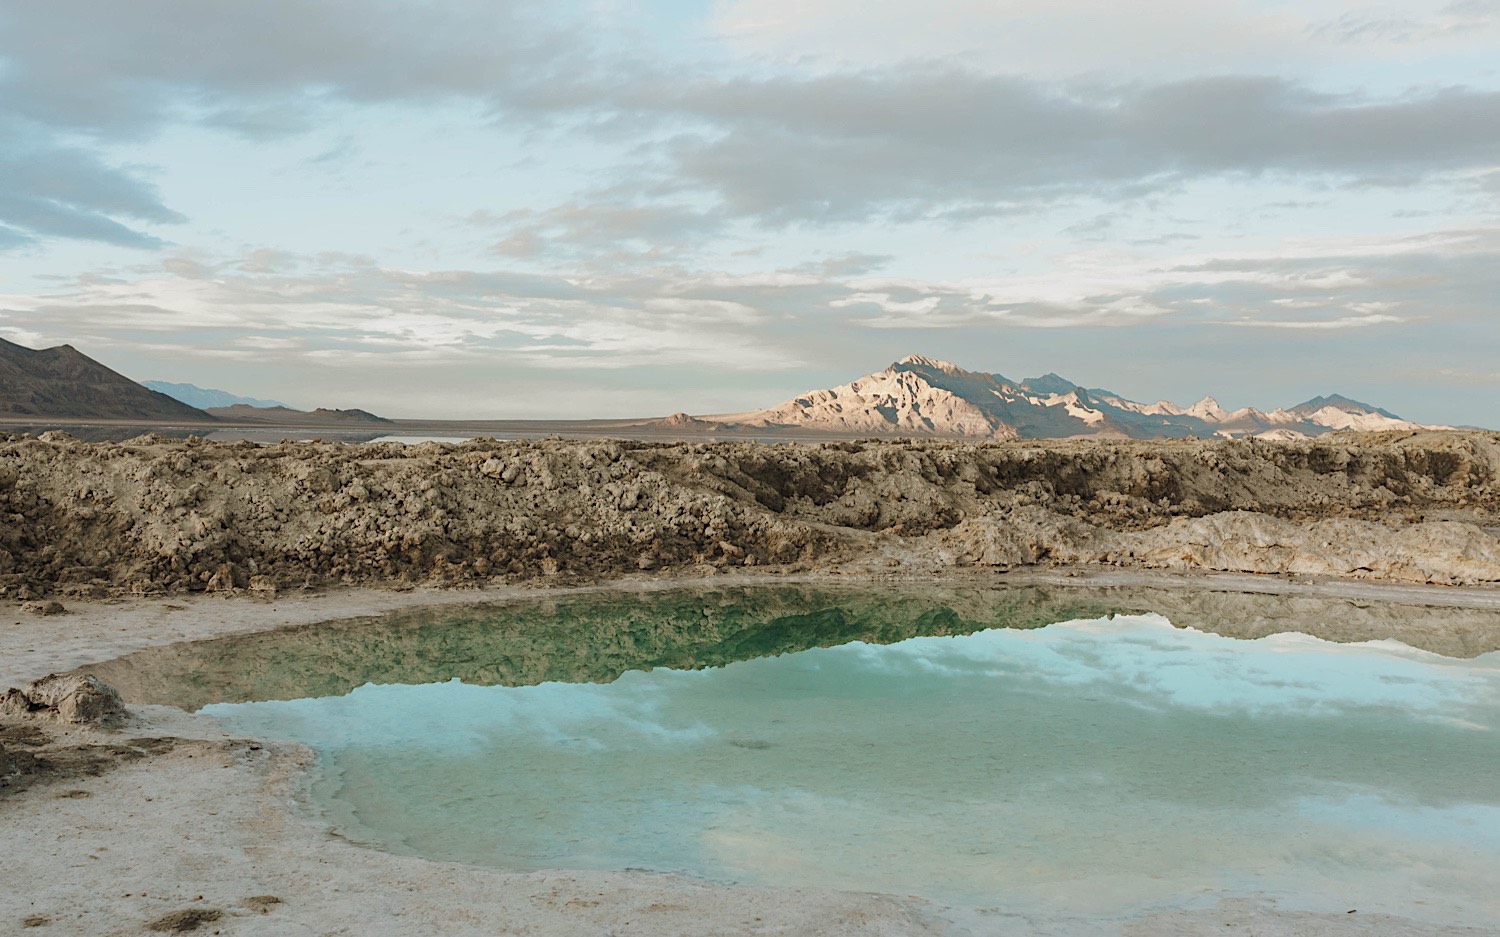 In the Utah Salt Flats a pool of water sits in front of a mountain range